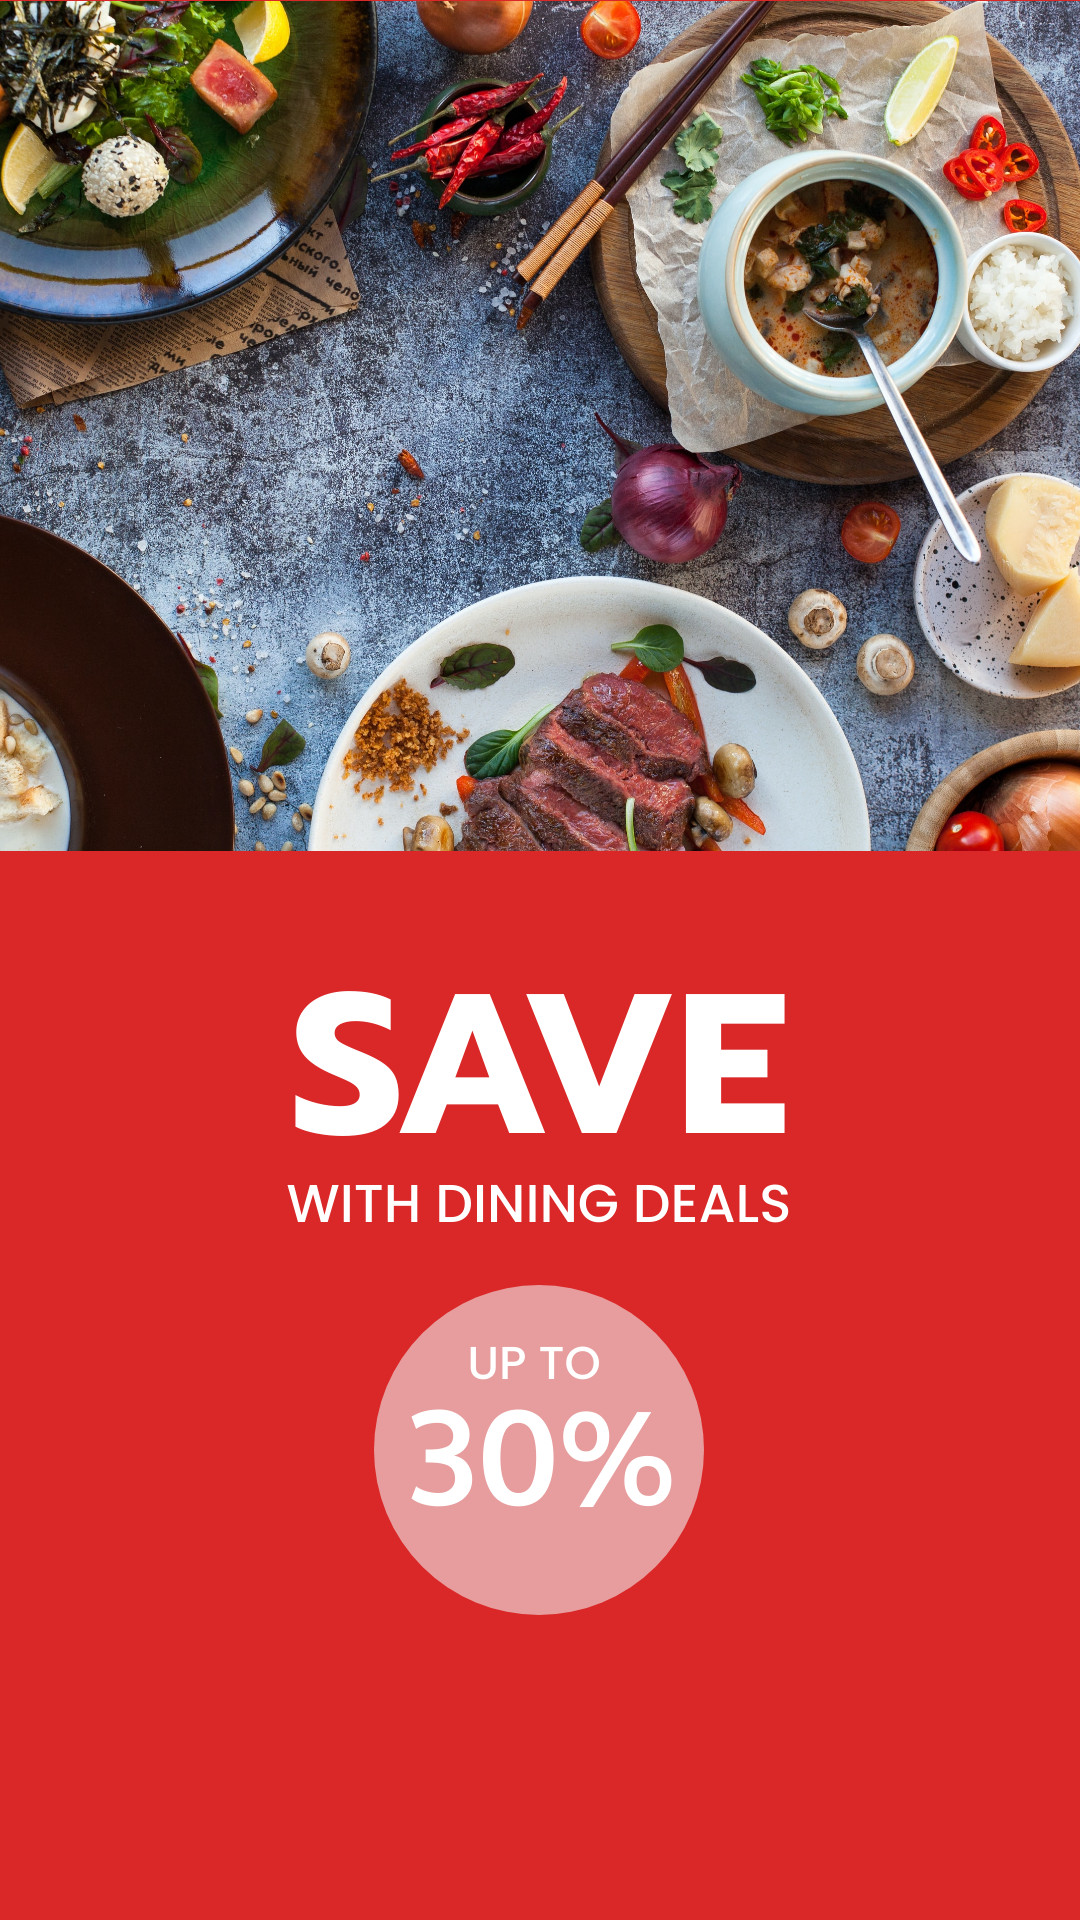 Save Money with Dining Deals 